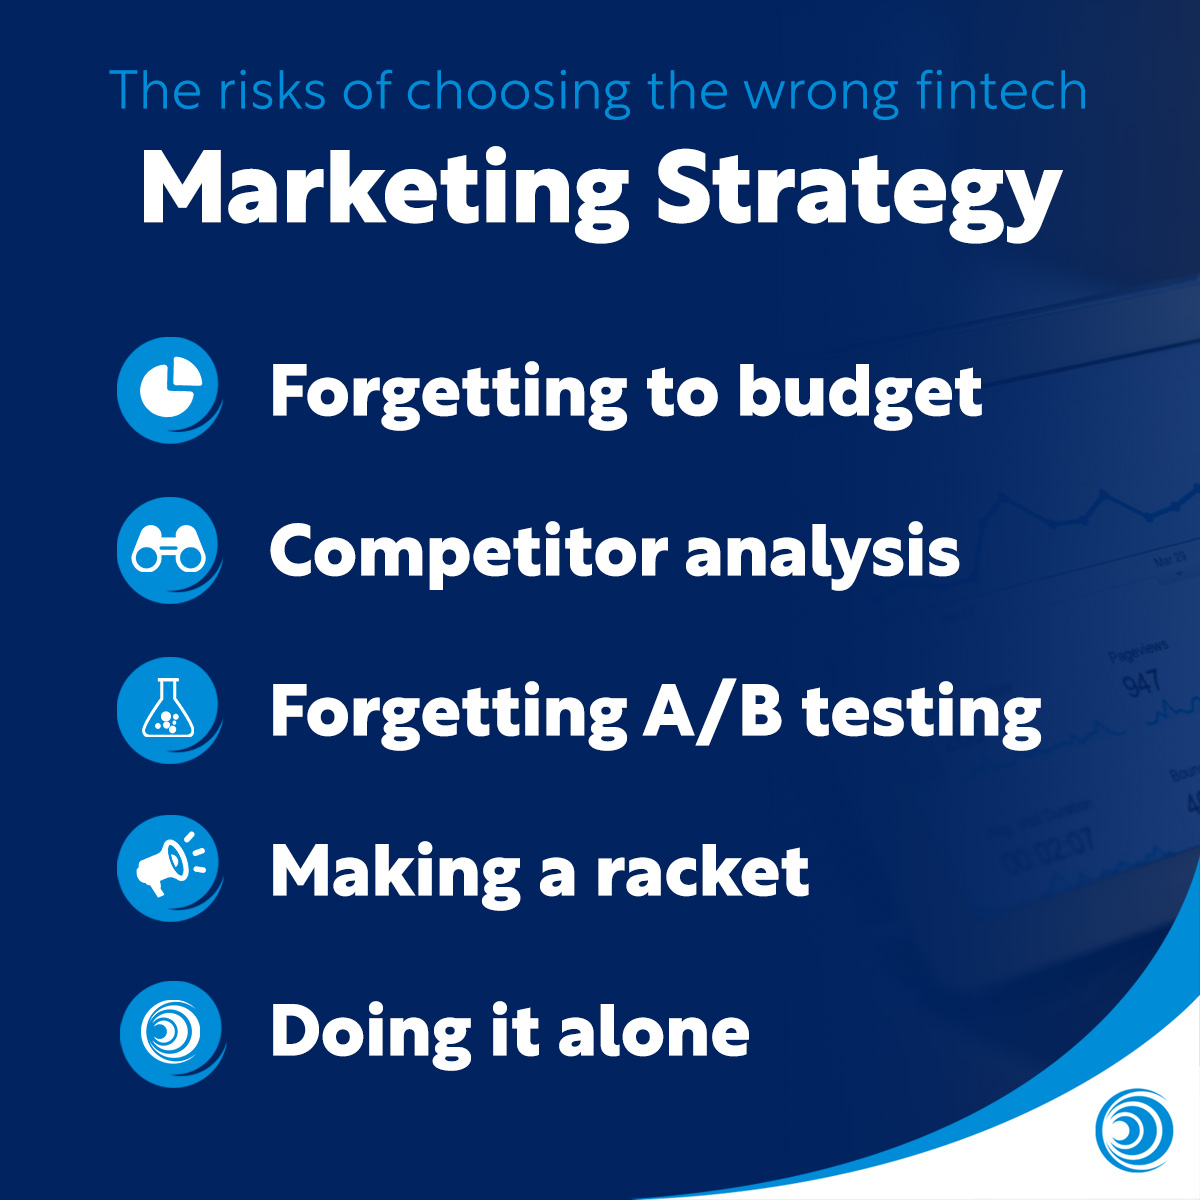 A Marketing Strategy for Fintech Startups image 2